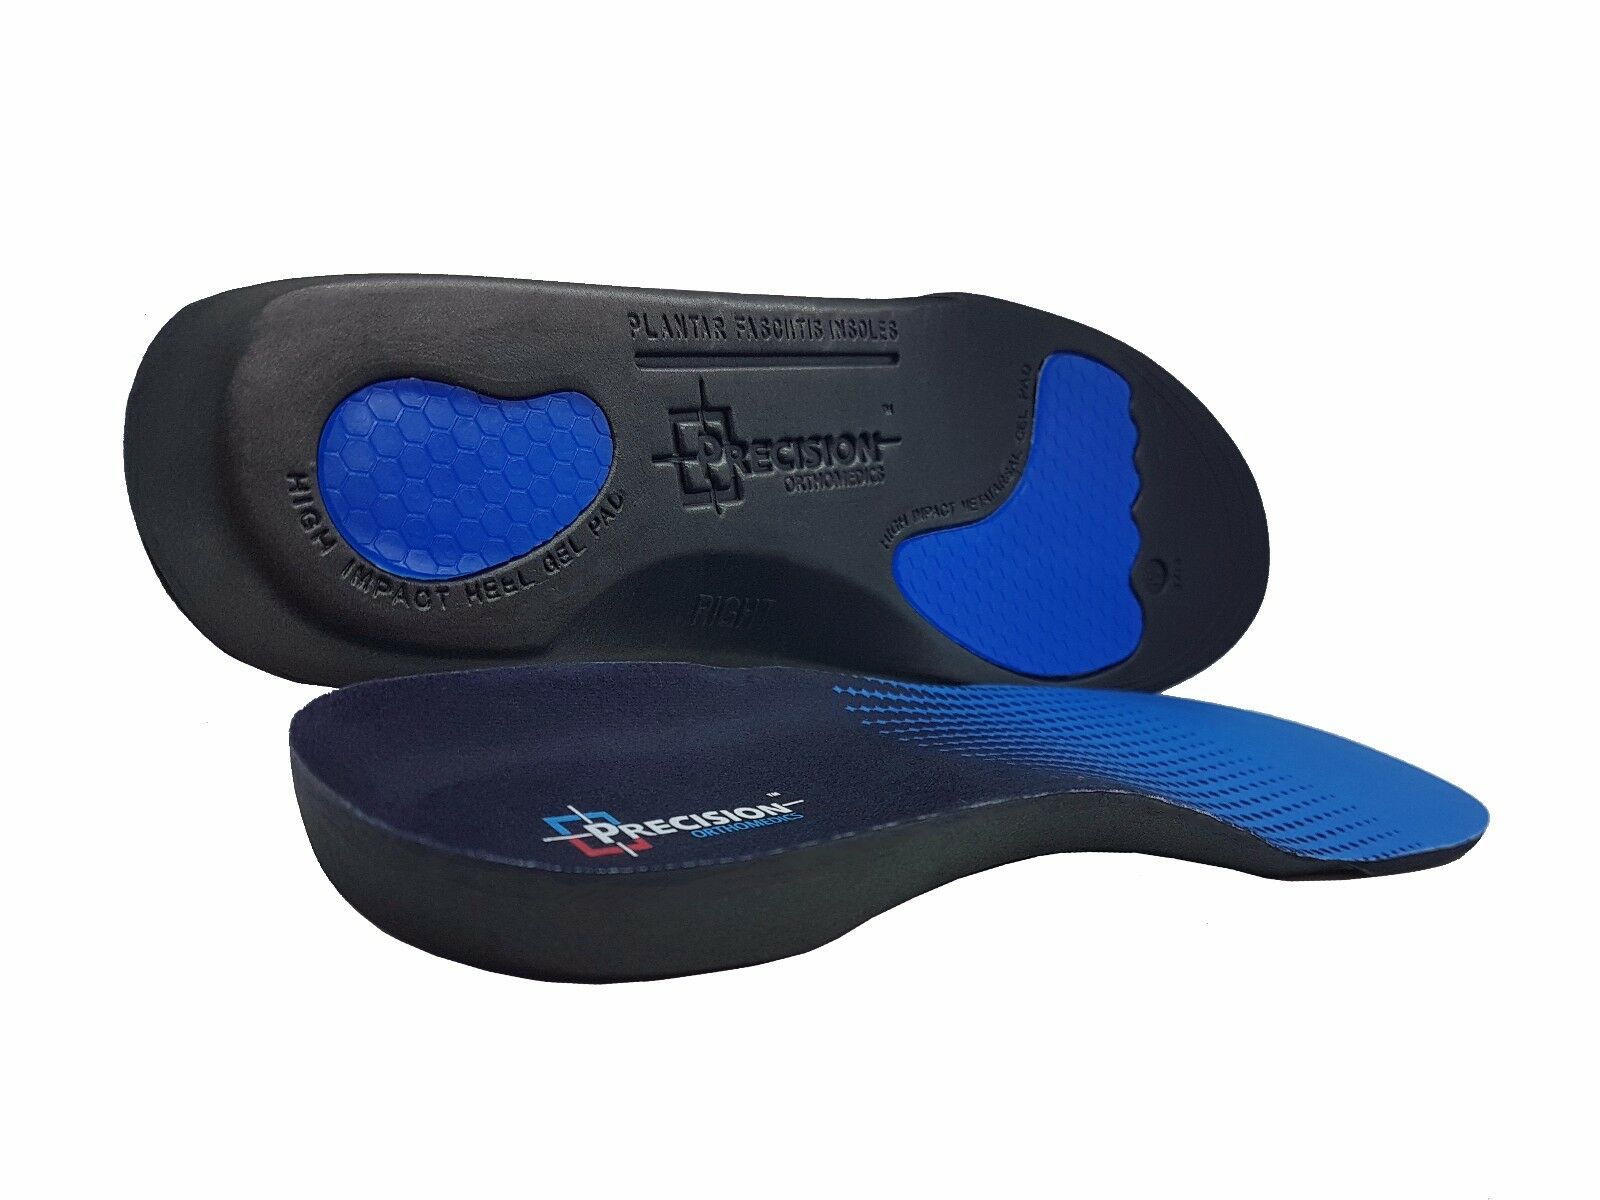 Full Length - Orthotic Arch Support Insoles - Precision Orthomedics